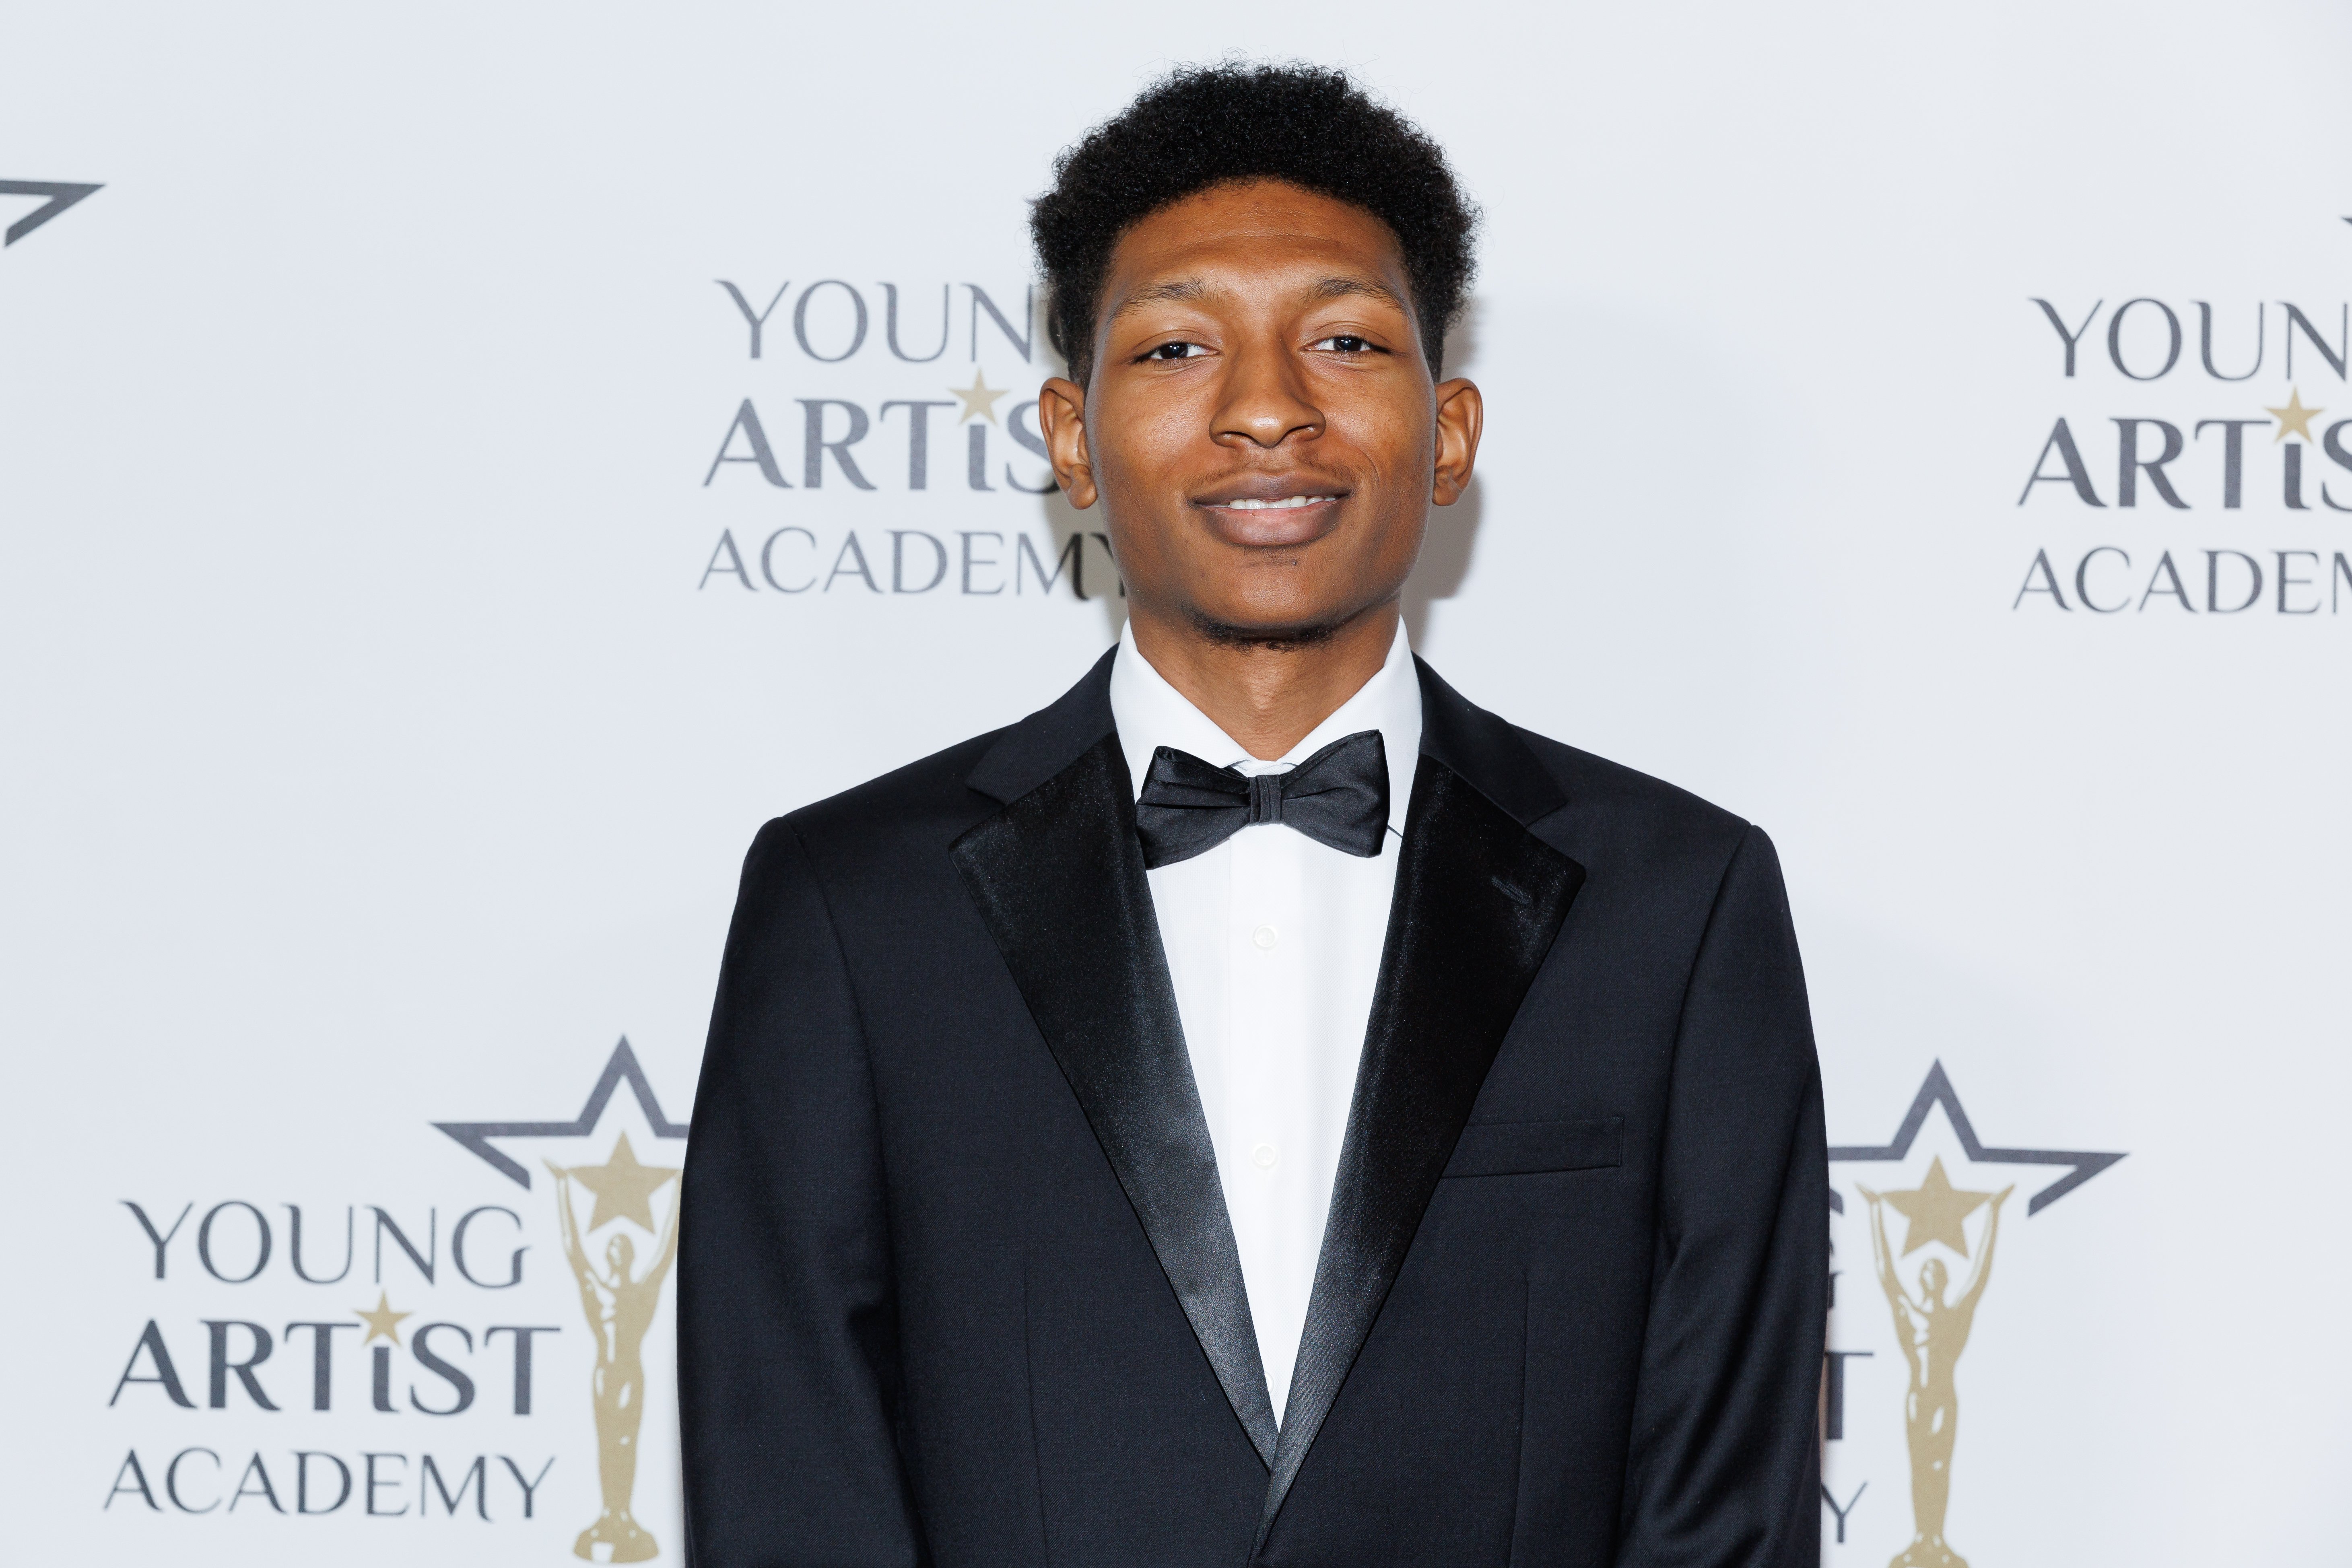 Skylan Brooks at the 43rd Annual Young Artist Academy Awards on October 2, 2022, in Los Angeles | Source: Getty Images